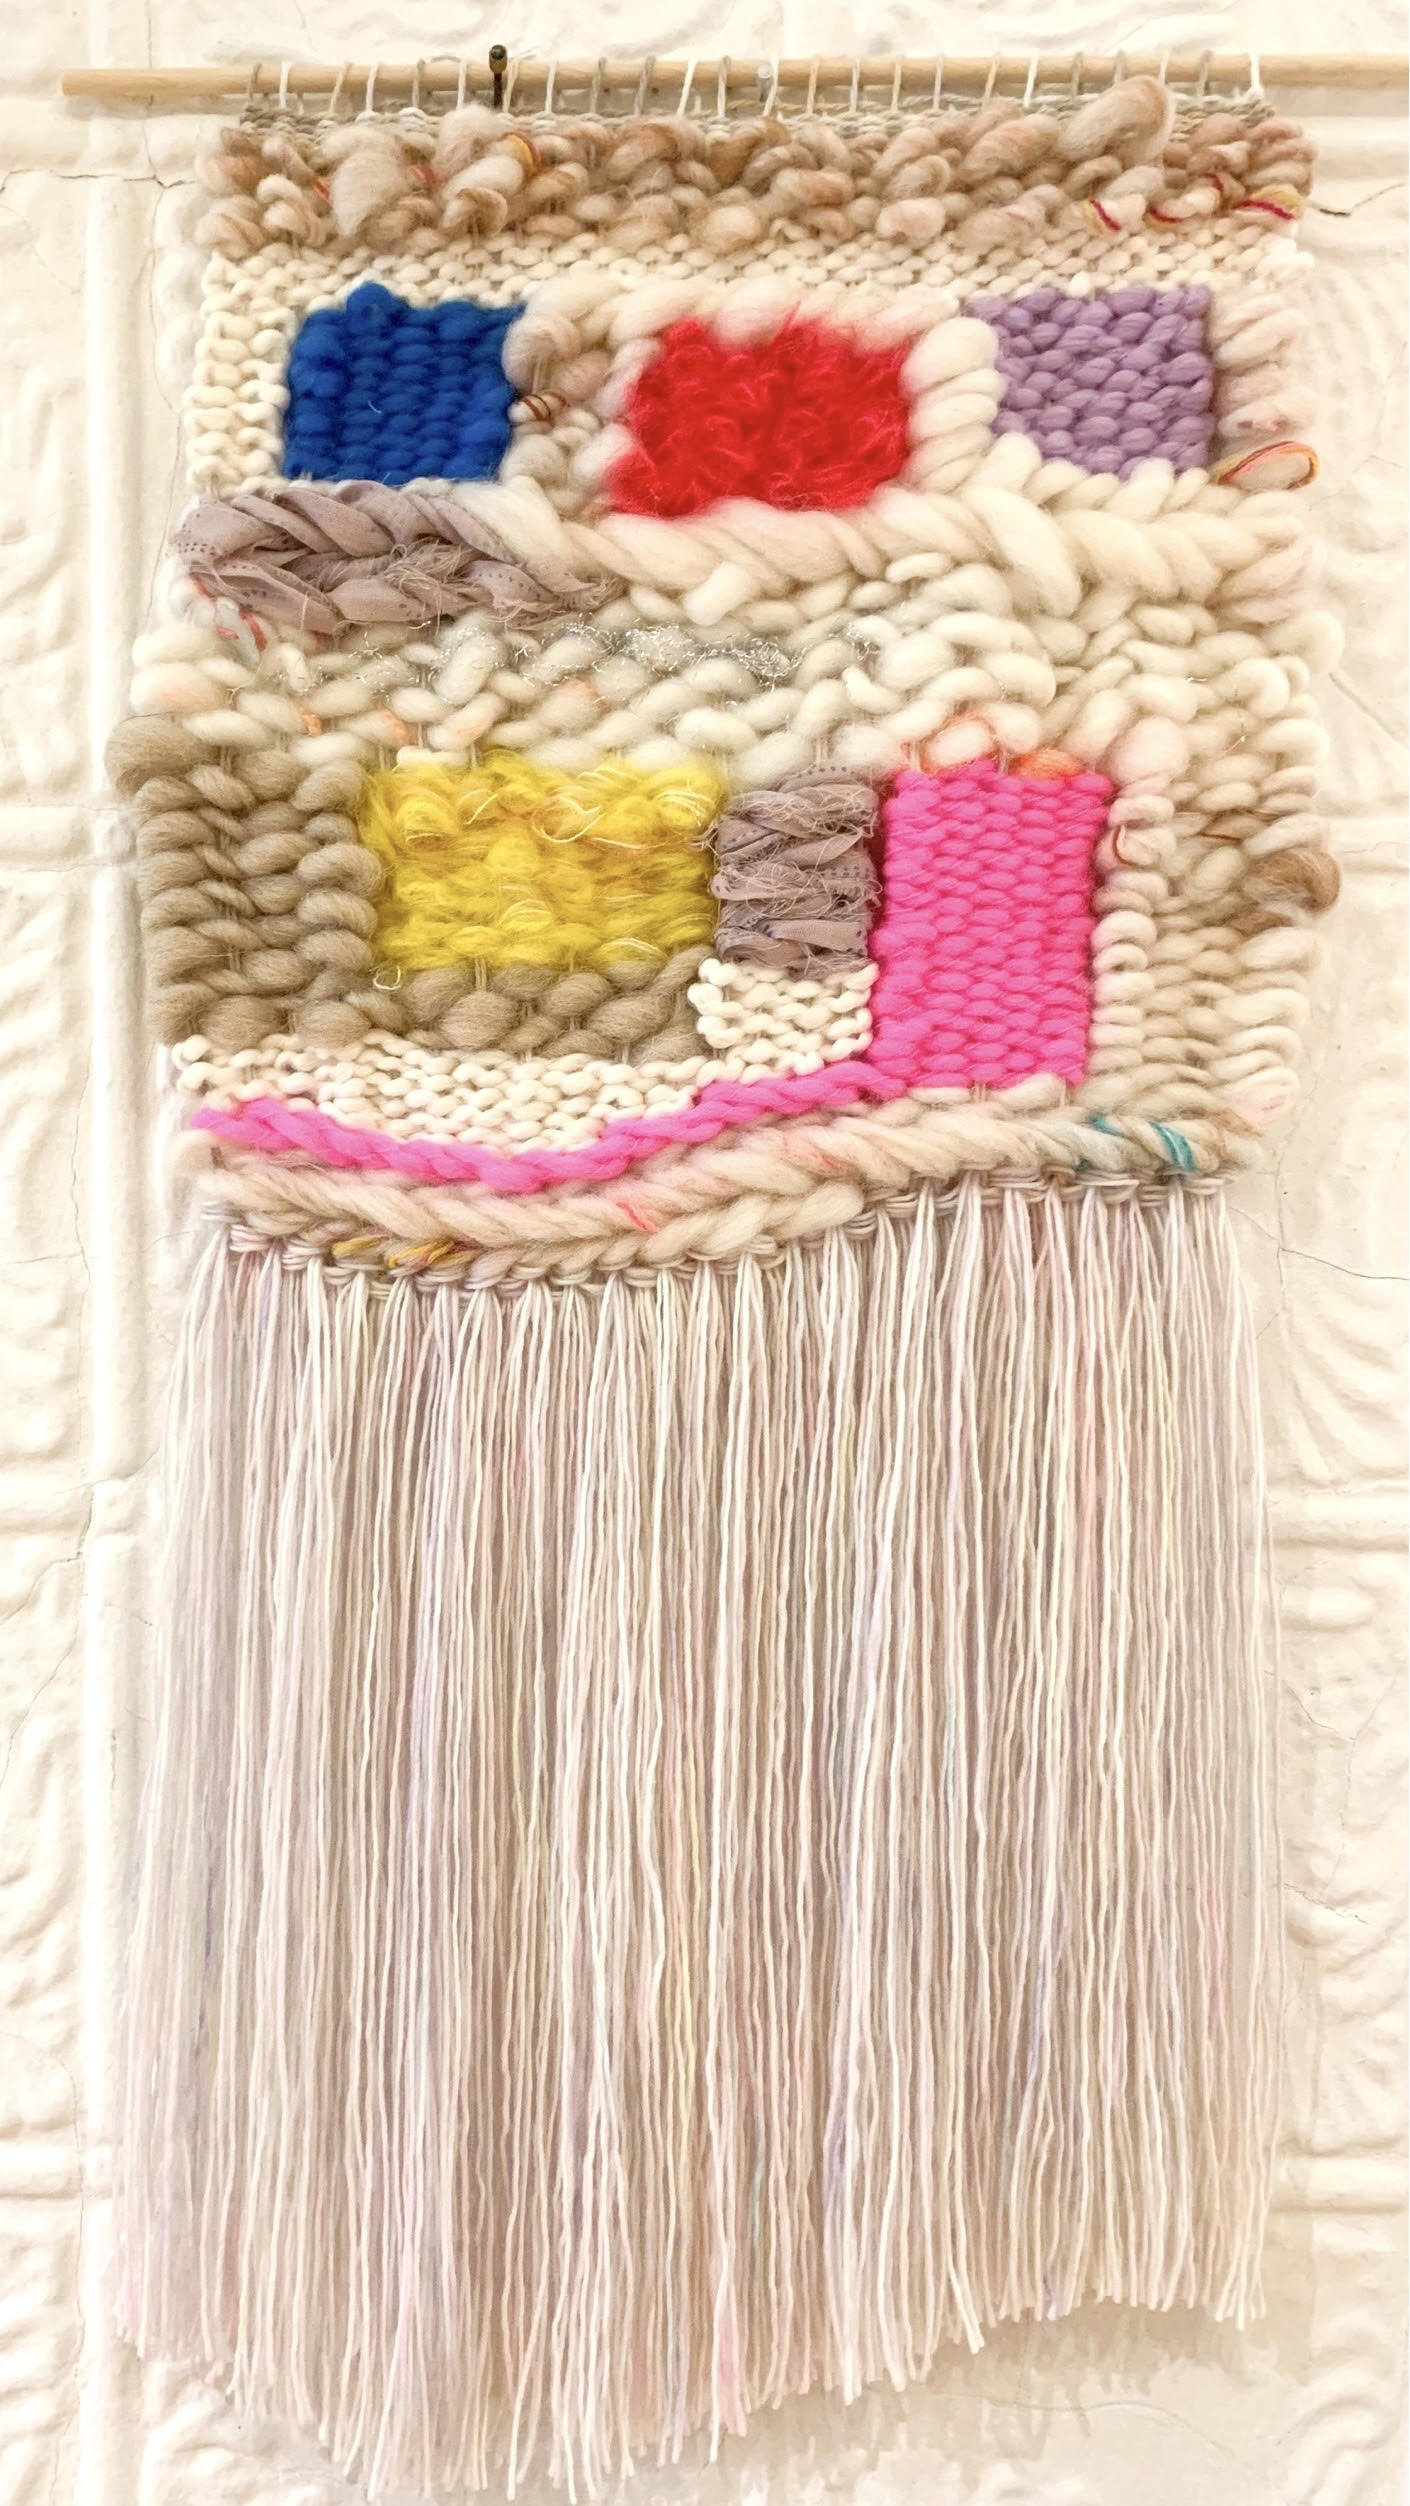 off white and beige woven tapestry with blue, red, purple, yellow and pink squares.